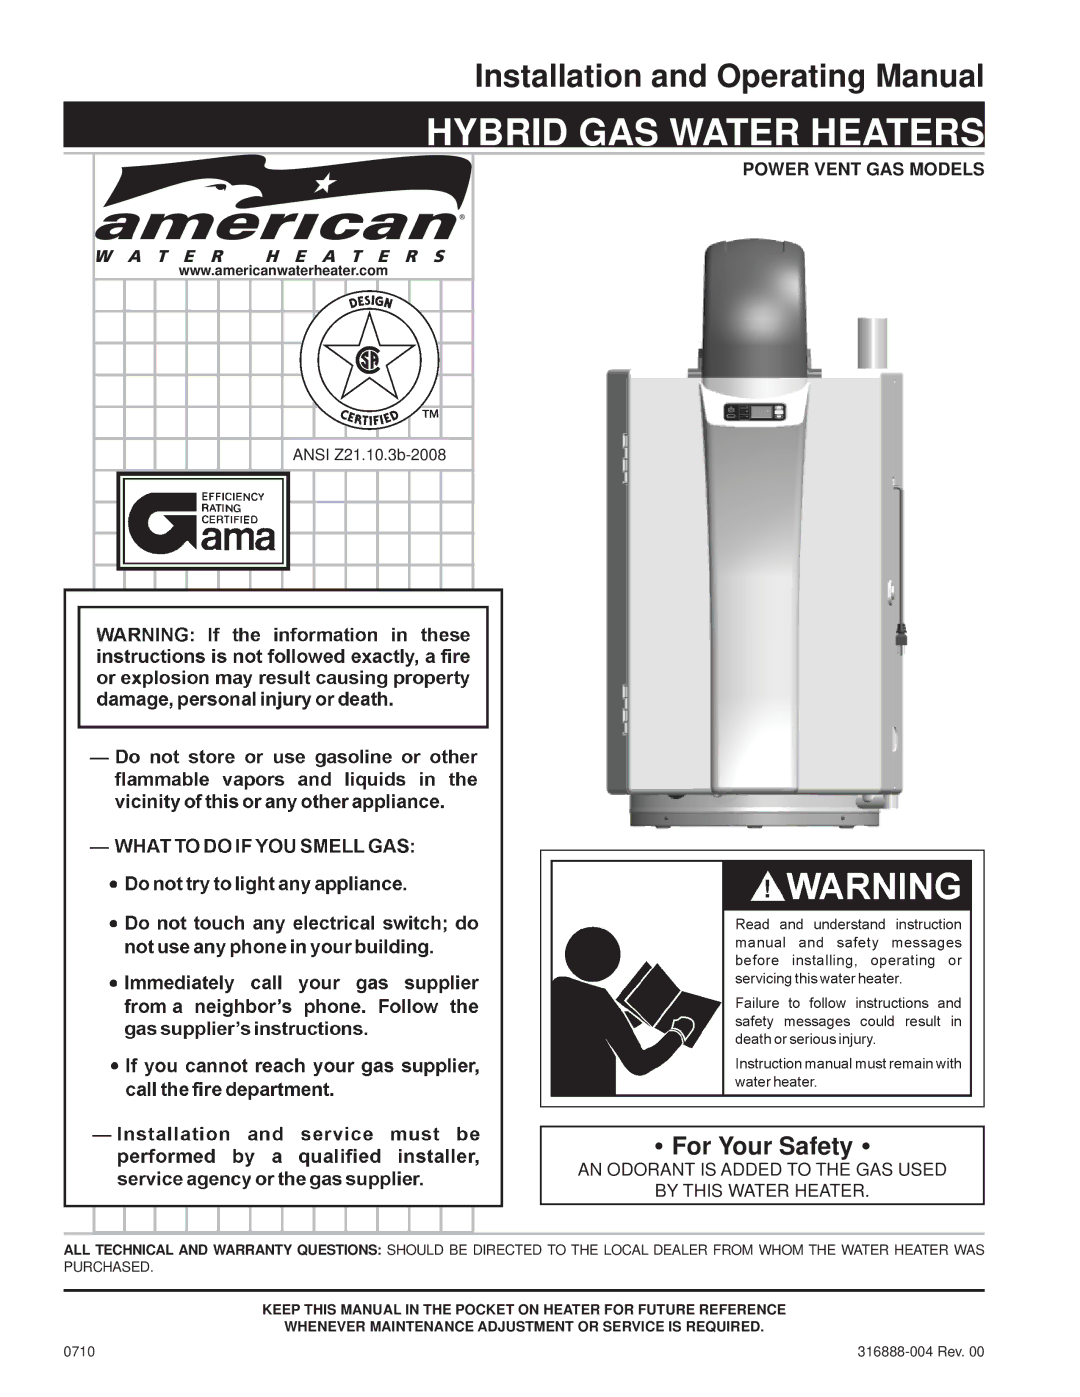 American Water Heater 316888-004 warranty Power Vent GAS Models, AN Odorant is Added to the GAS Used By this Water Heater 